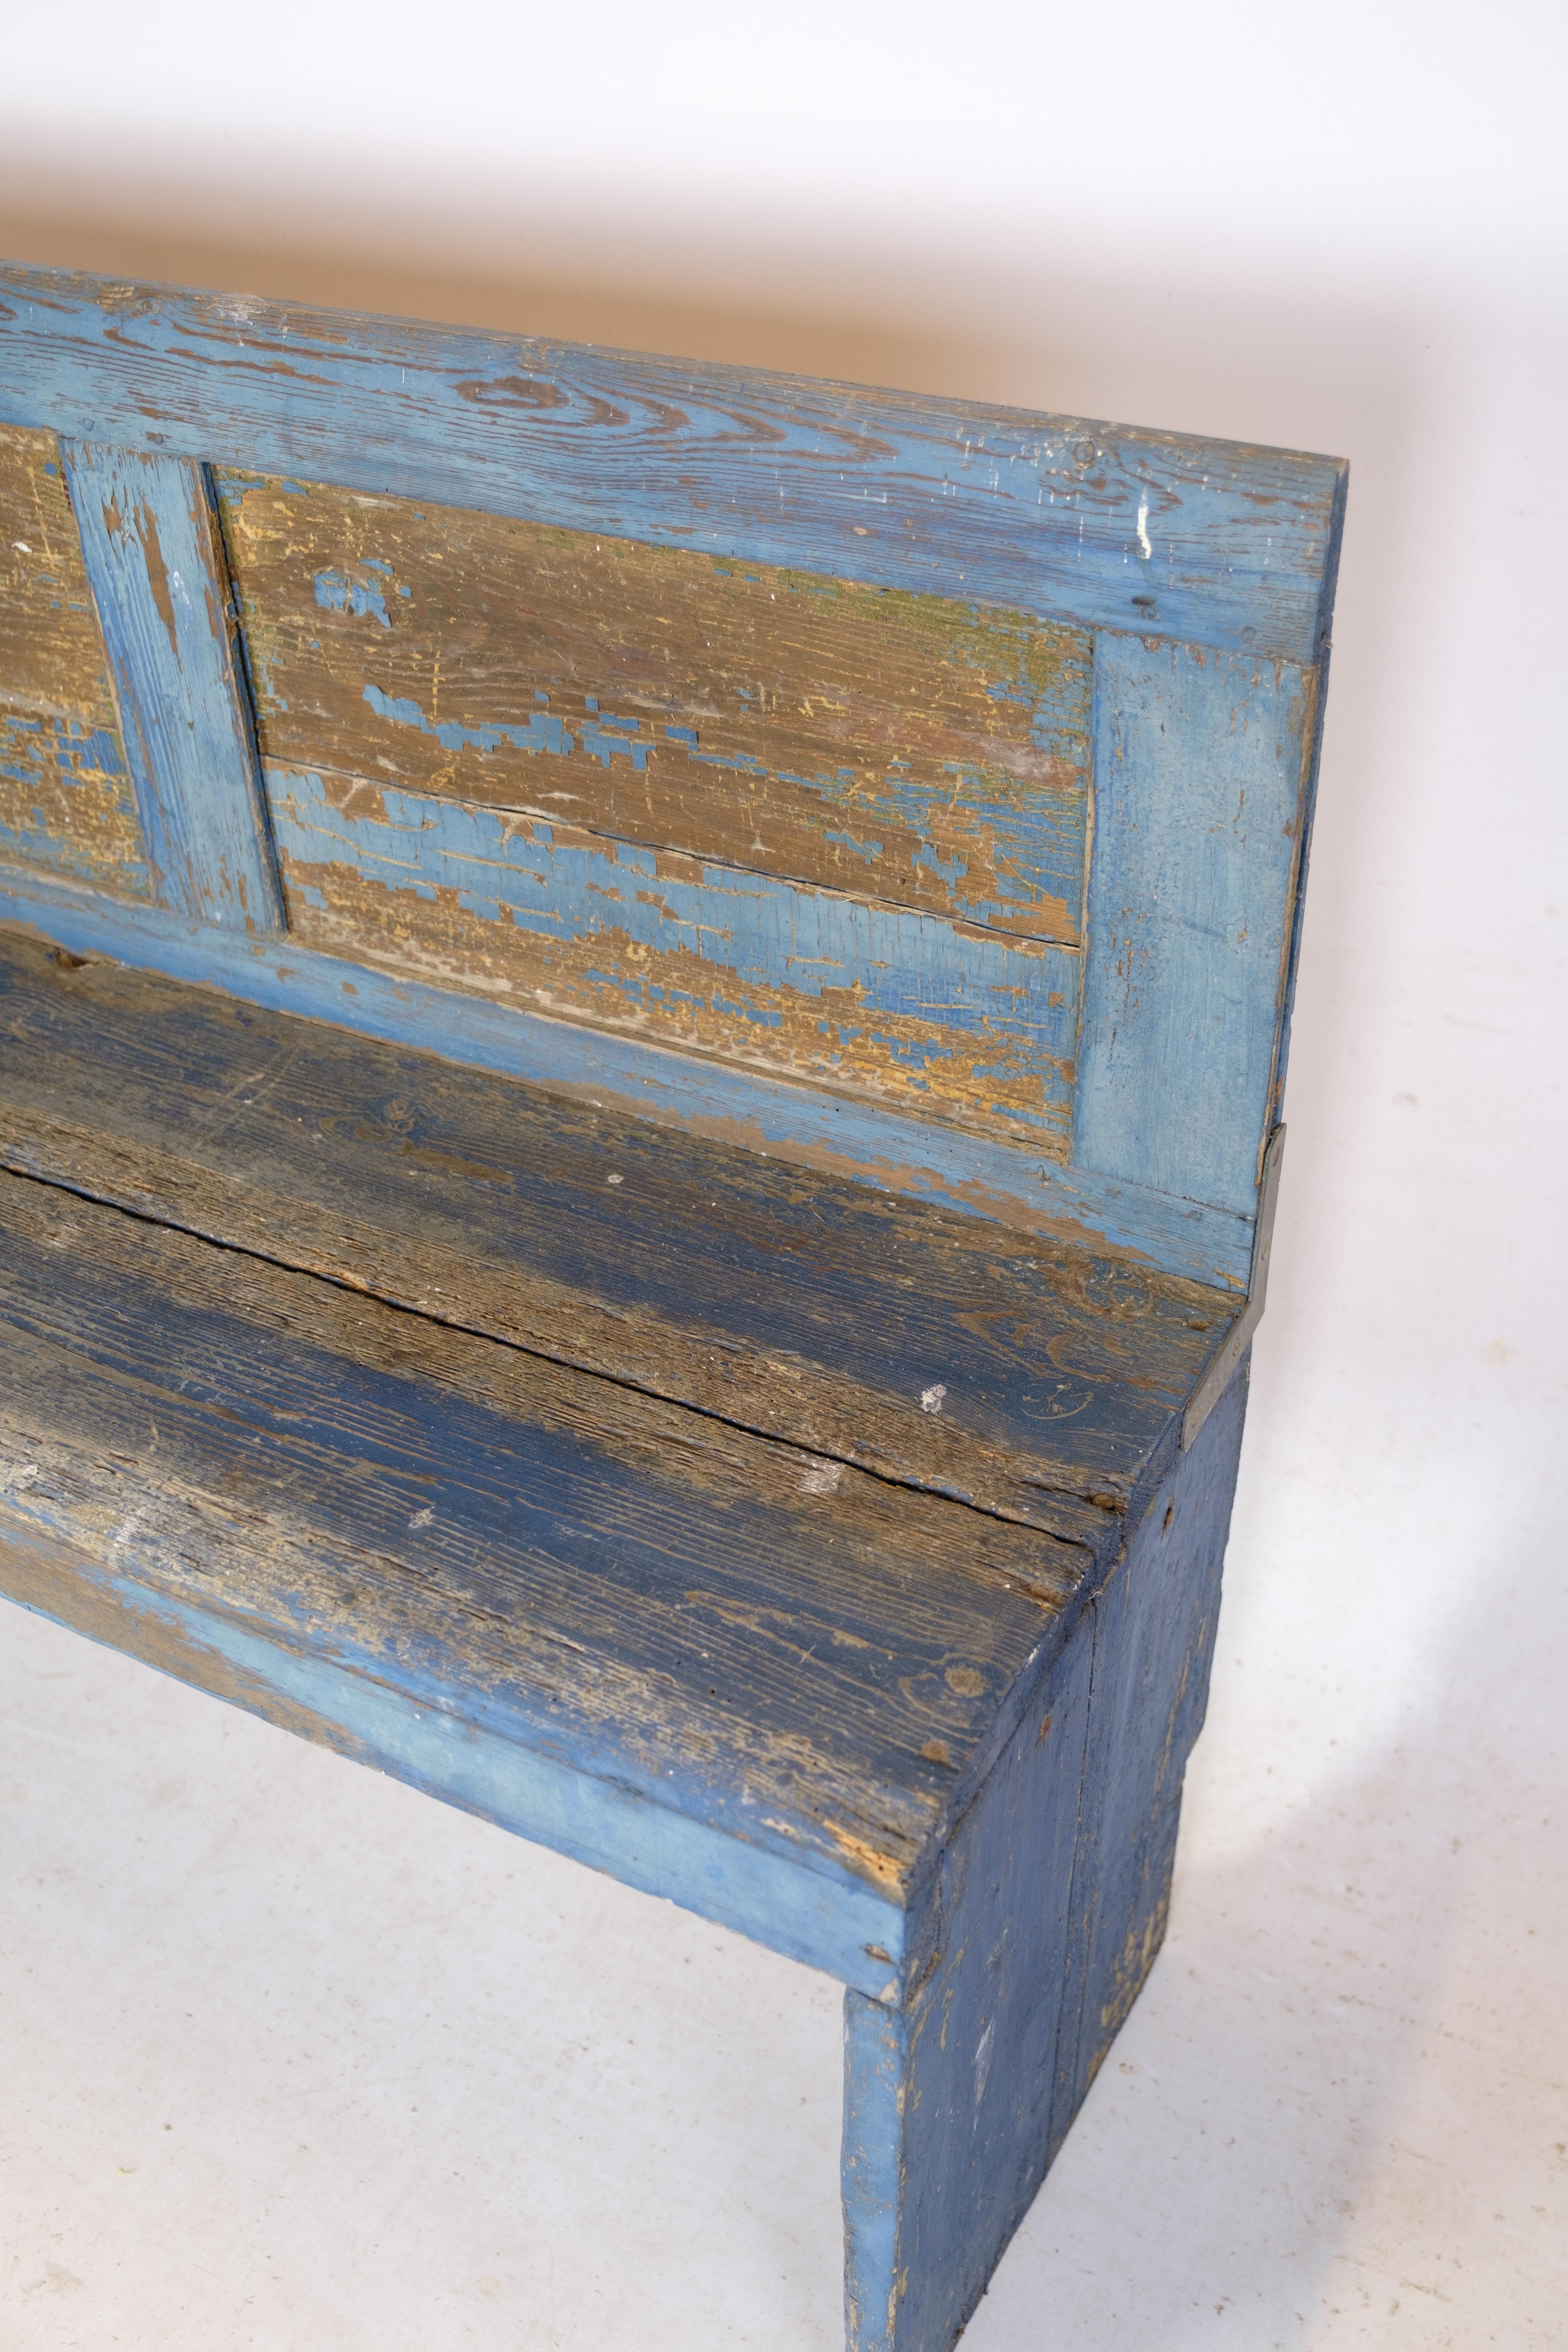 Antique bench in blue-painted oak from around the 1840s.
Dimensions in cm: H:84 W:202 D:37